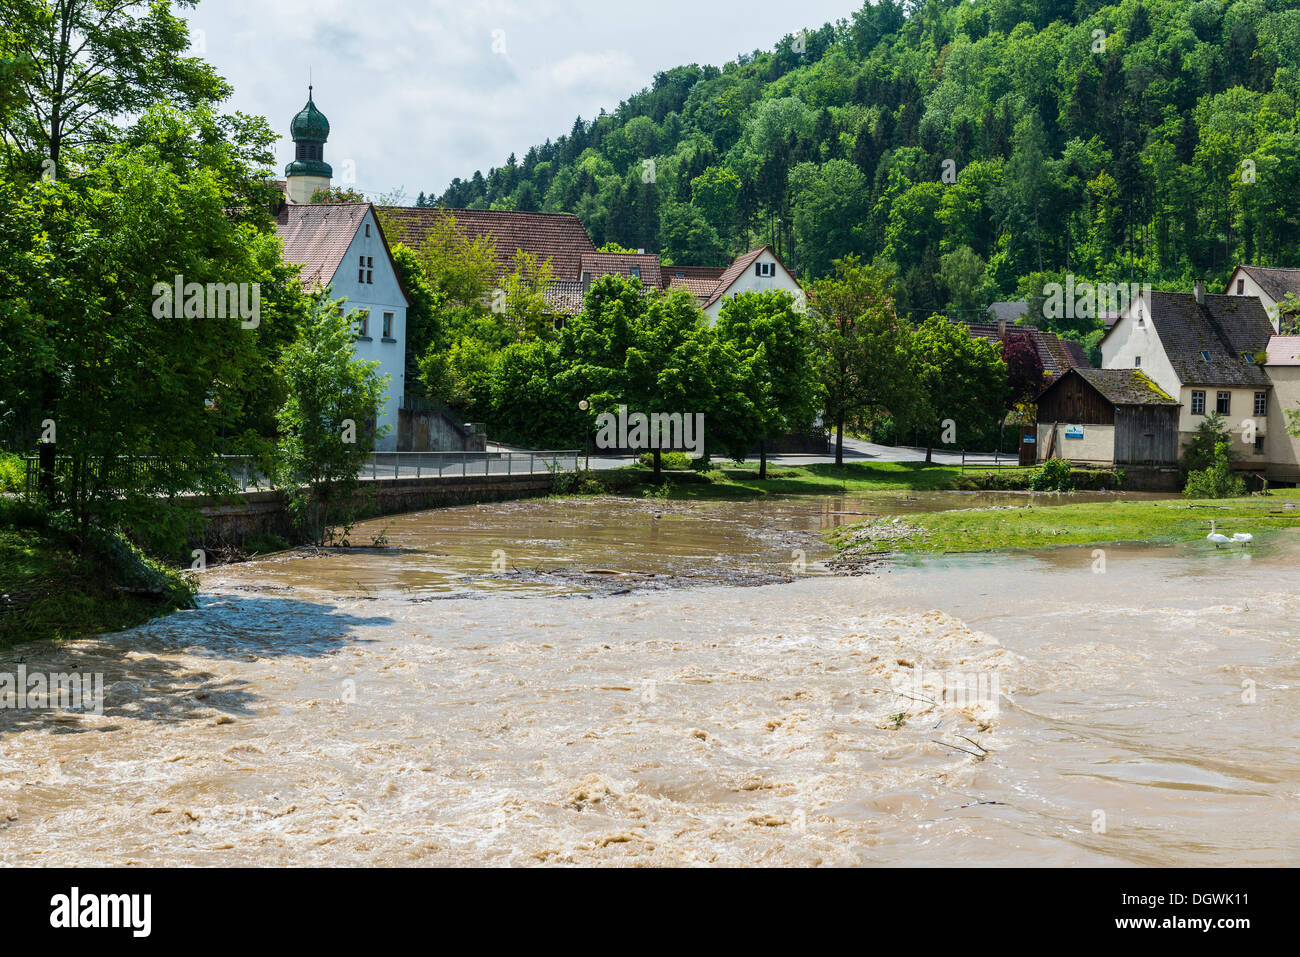 Flood of the river Neckar, 02 Jun 2013 at noon, flooded weir and meadows, river with a strong current, Bad Niedernau Stock Photo